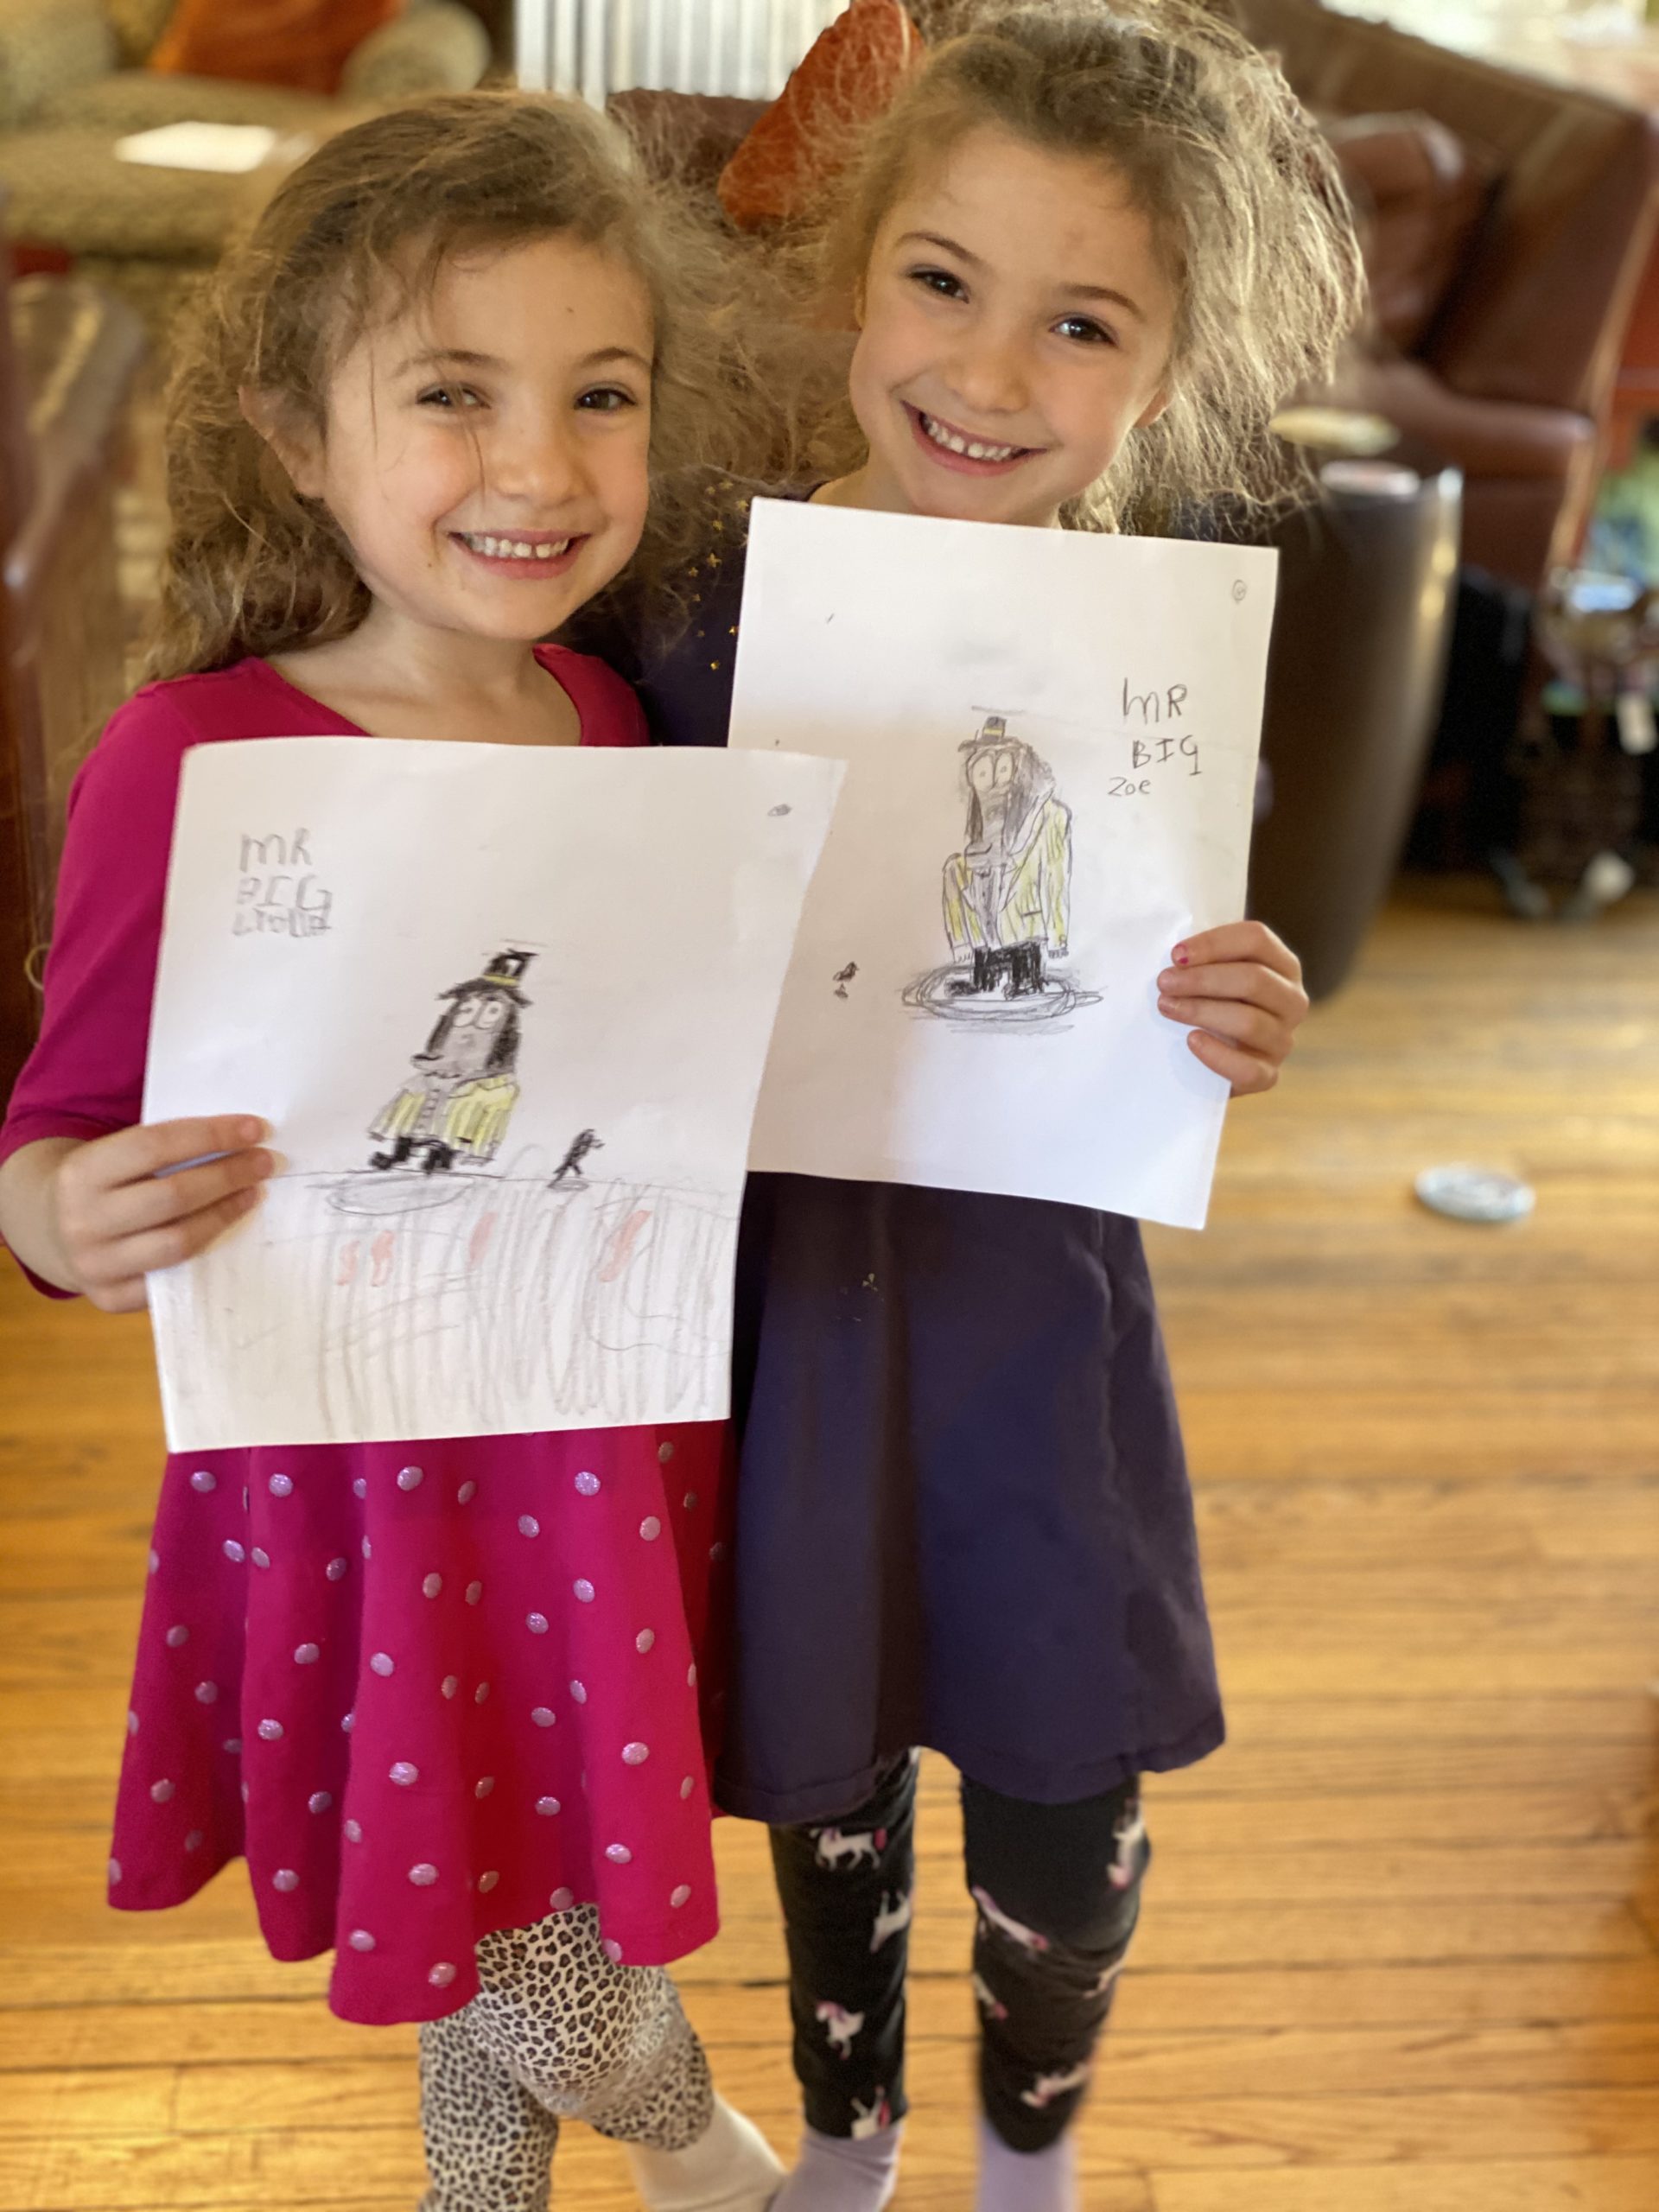 Lydia and Zoe with their Mr. Big Ed Vere drawings